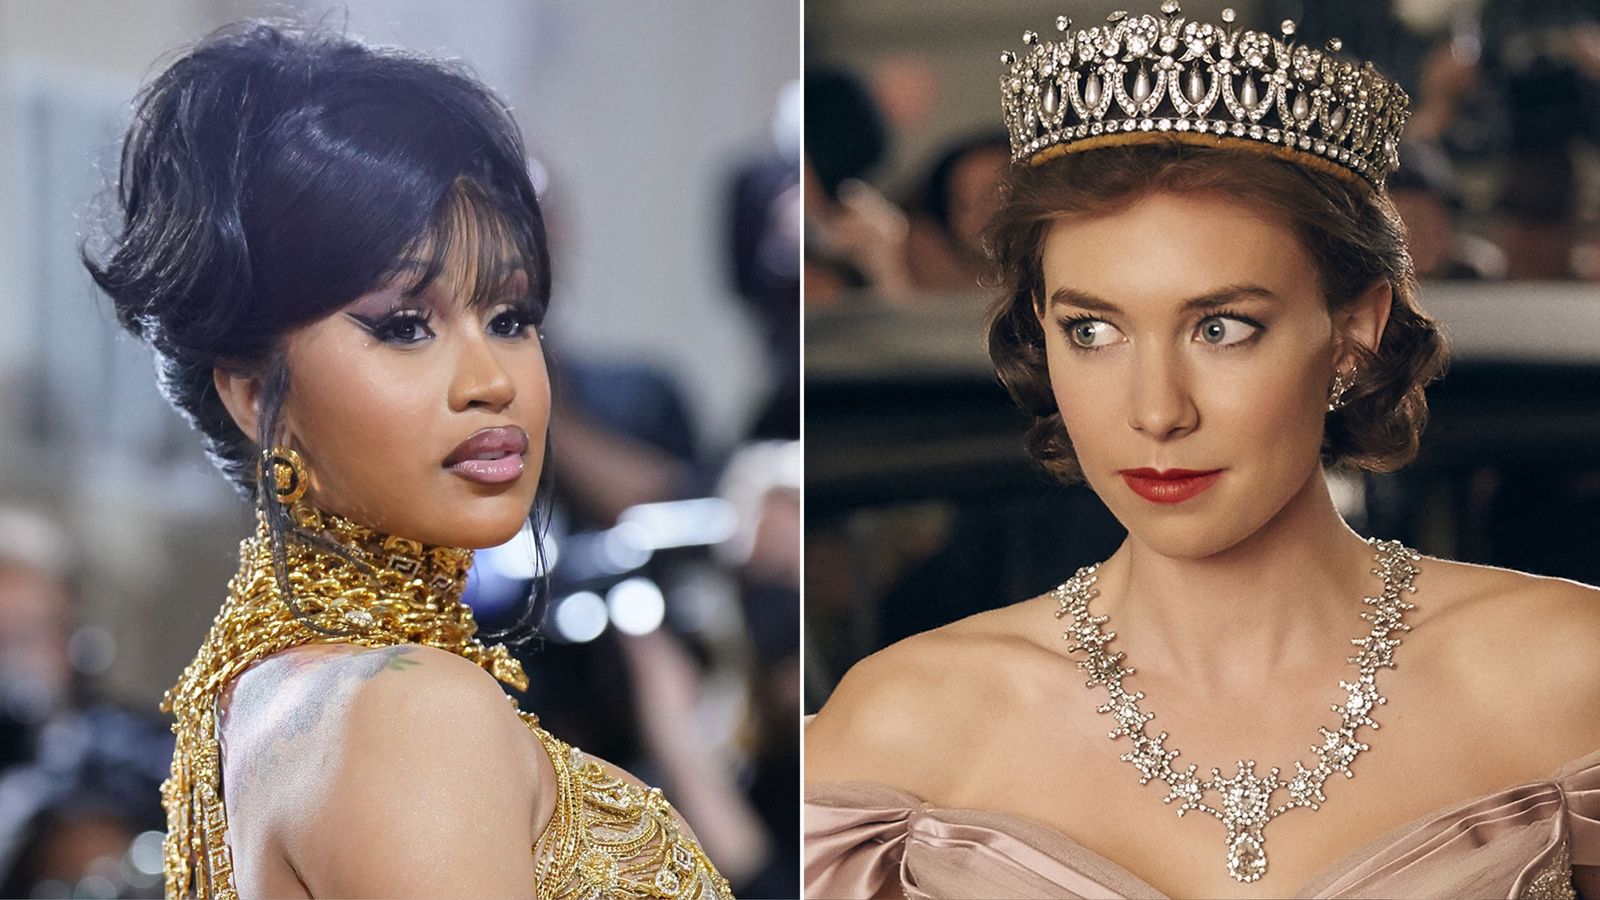 Cardi B wants to eat biscuits with Princess Margaret after watching The Crown